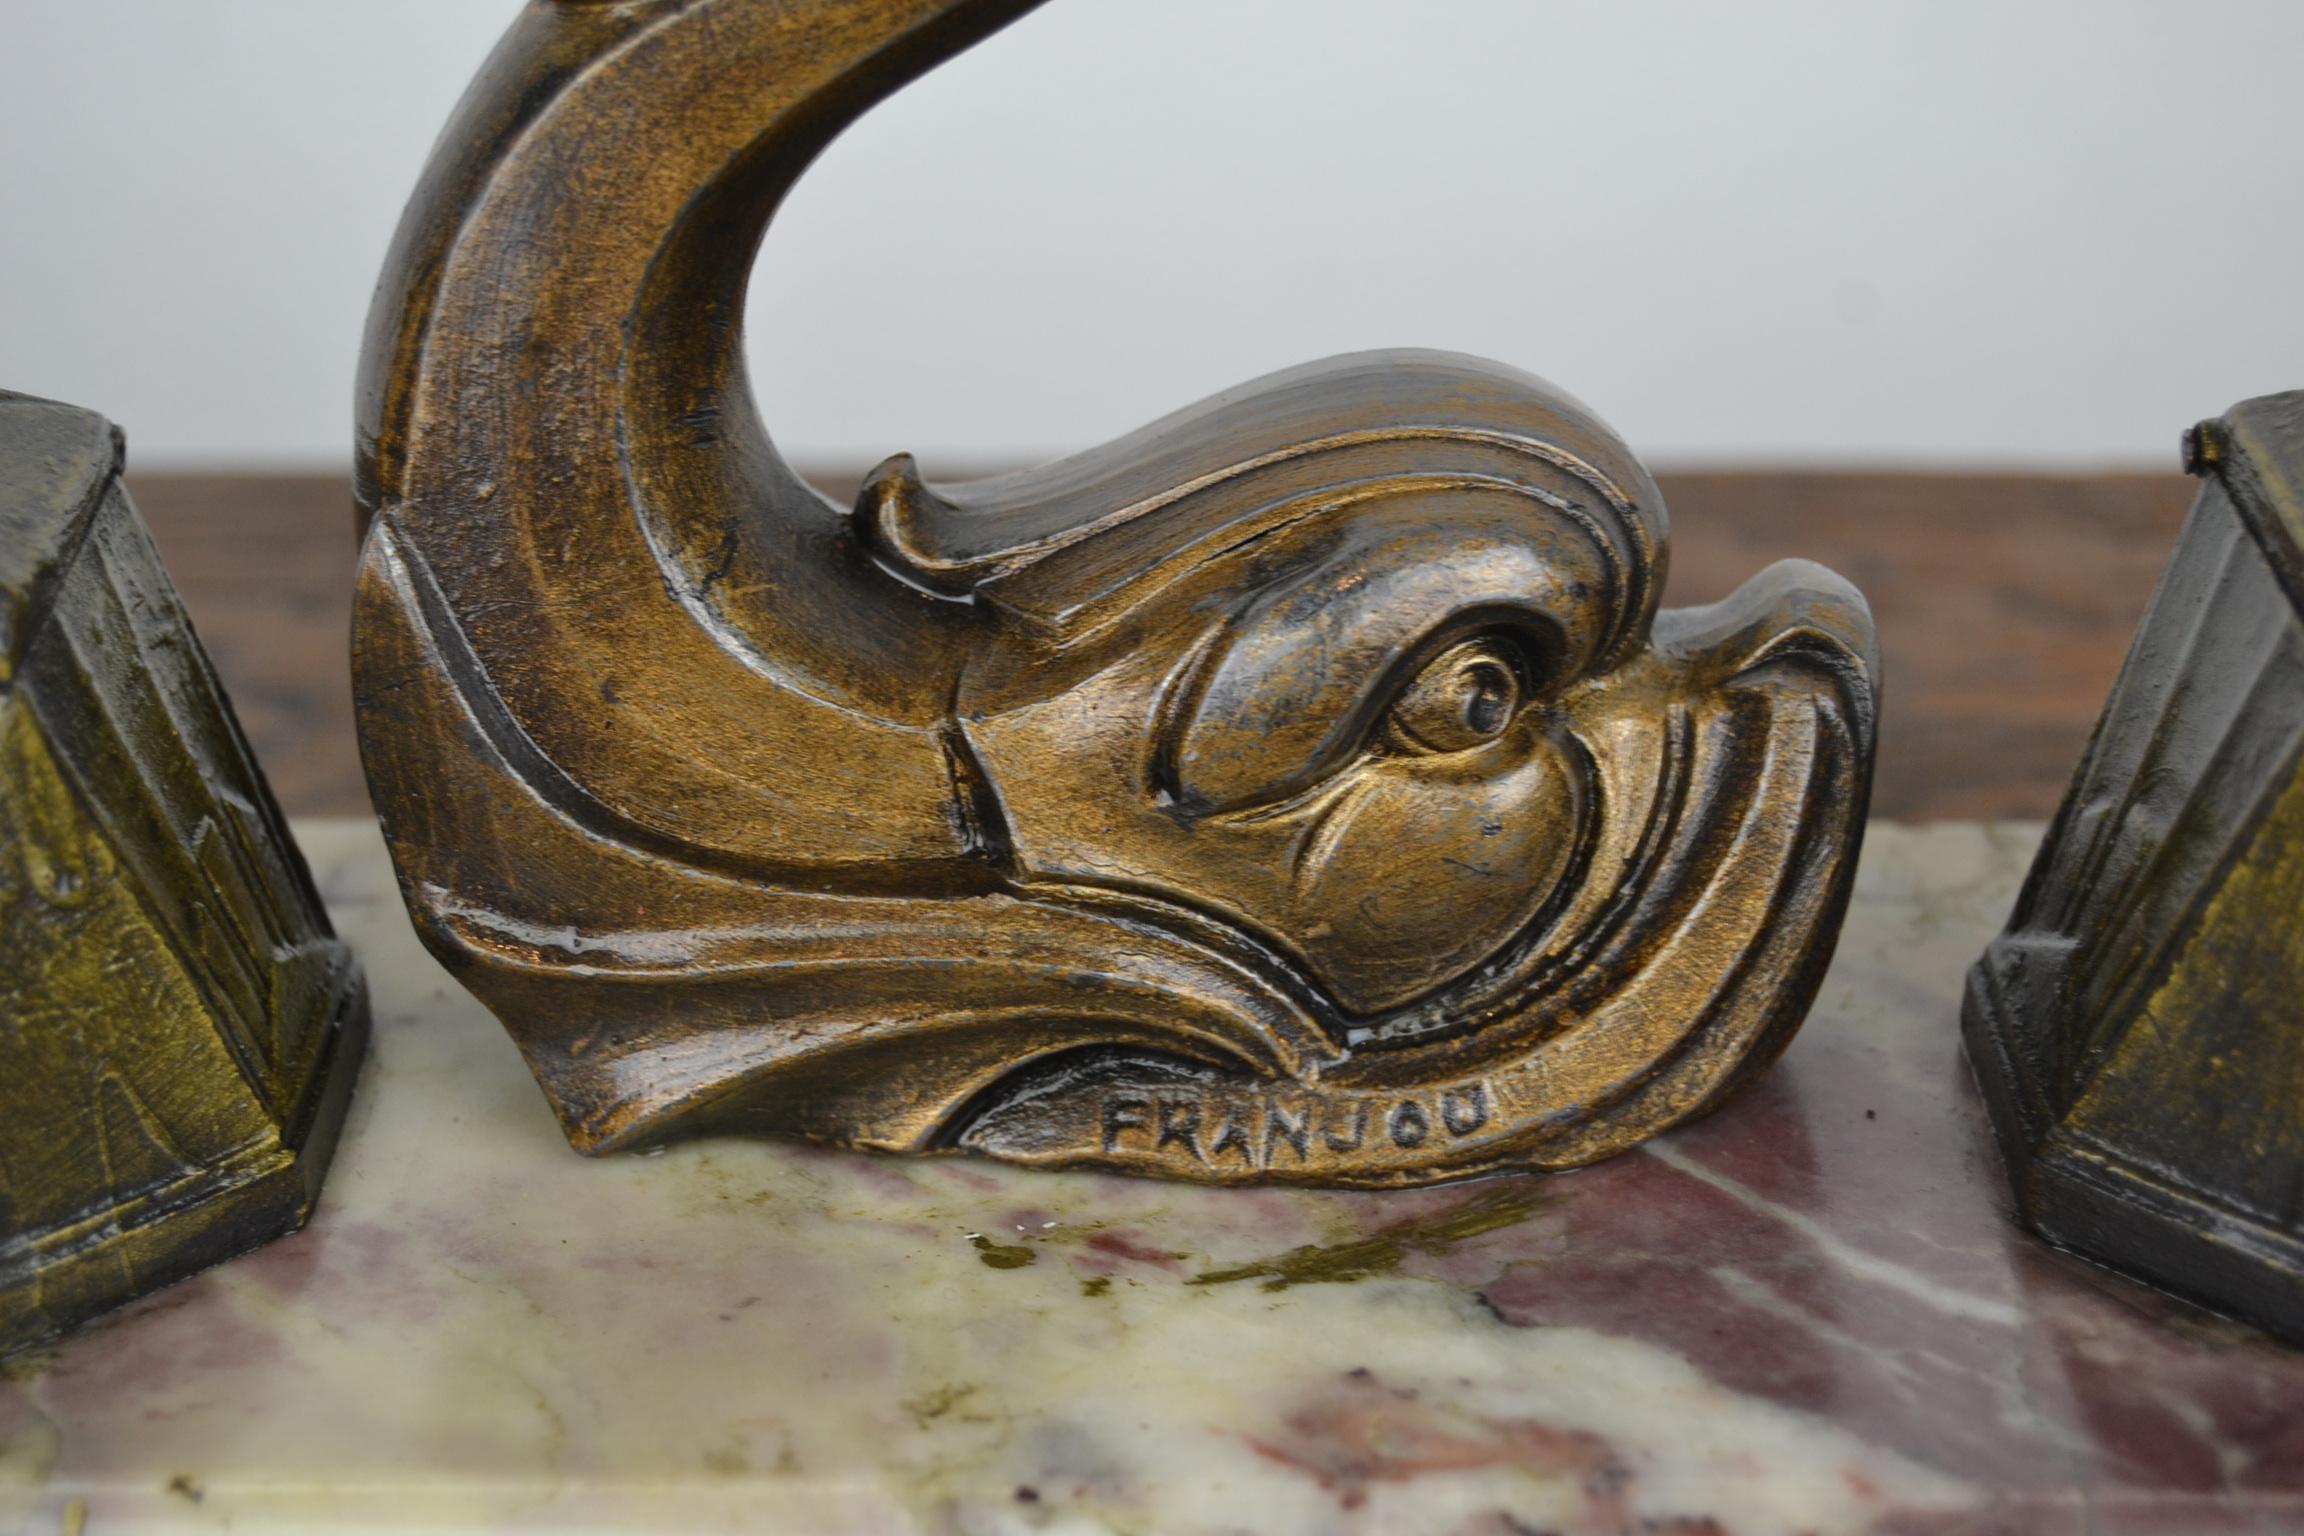 Art Deco inkwell with a fish by the French Artist Franjou.
This desk ornament has a bronze patinated metal dolphin fish with two ink reservoir mounted on Venous marble base. The glass inkwells are no longer in the reservoirs. The fish sculpture is